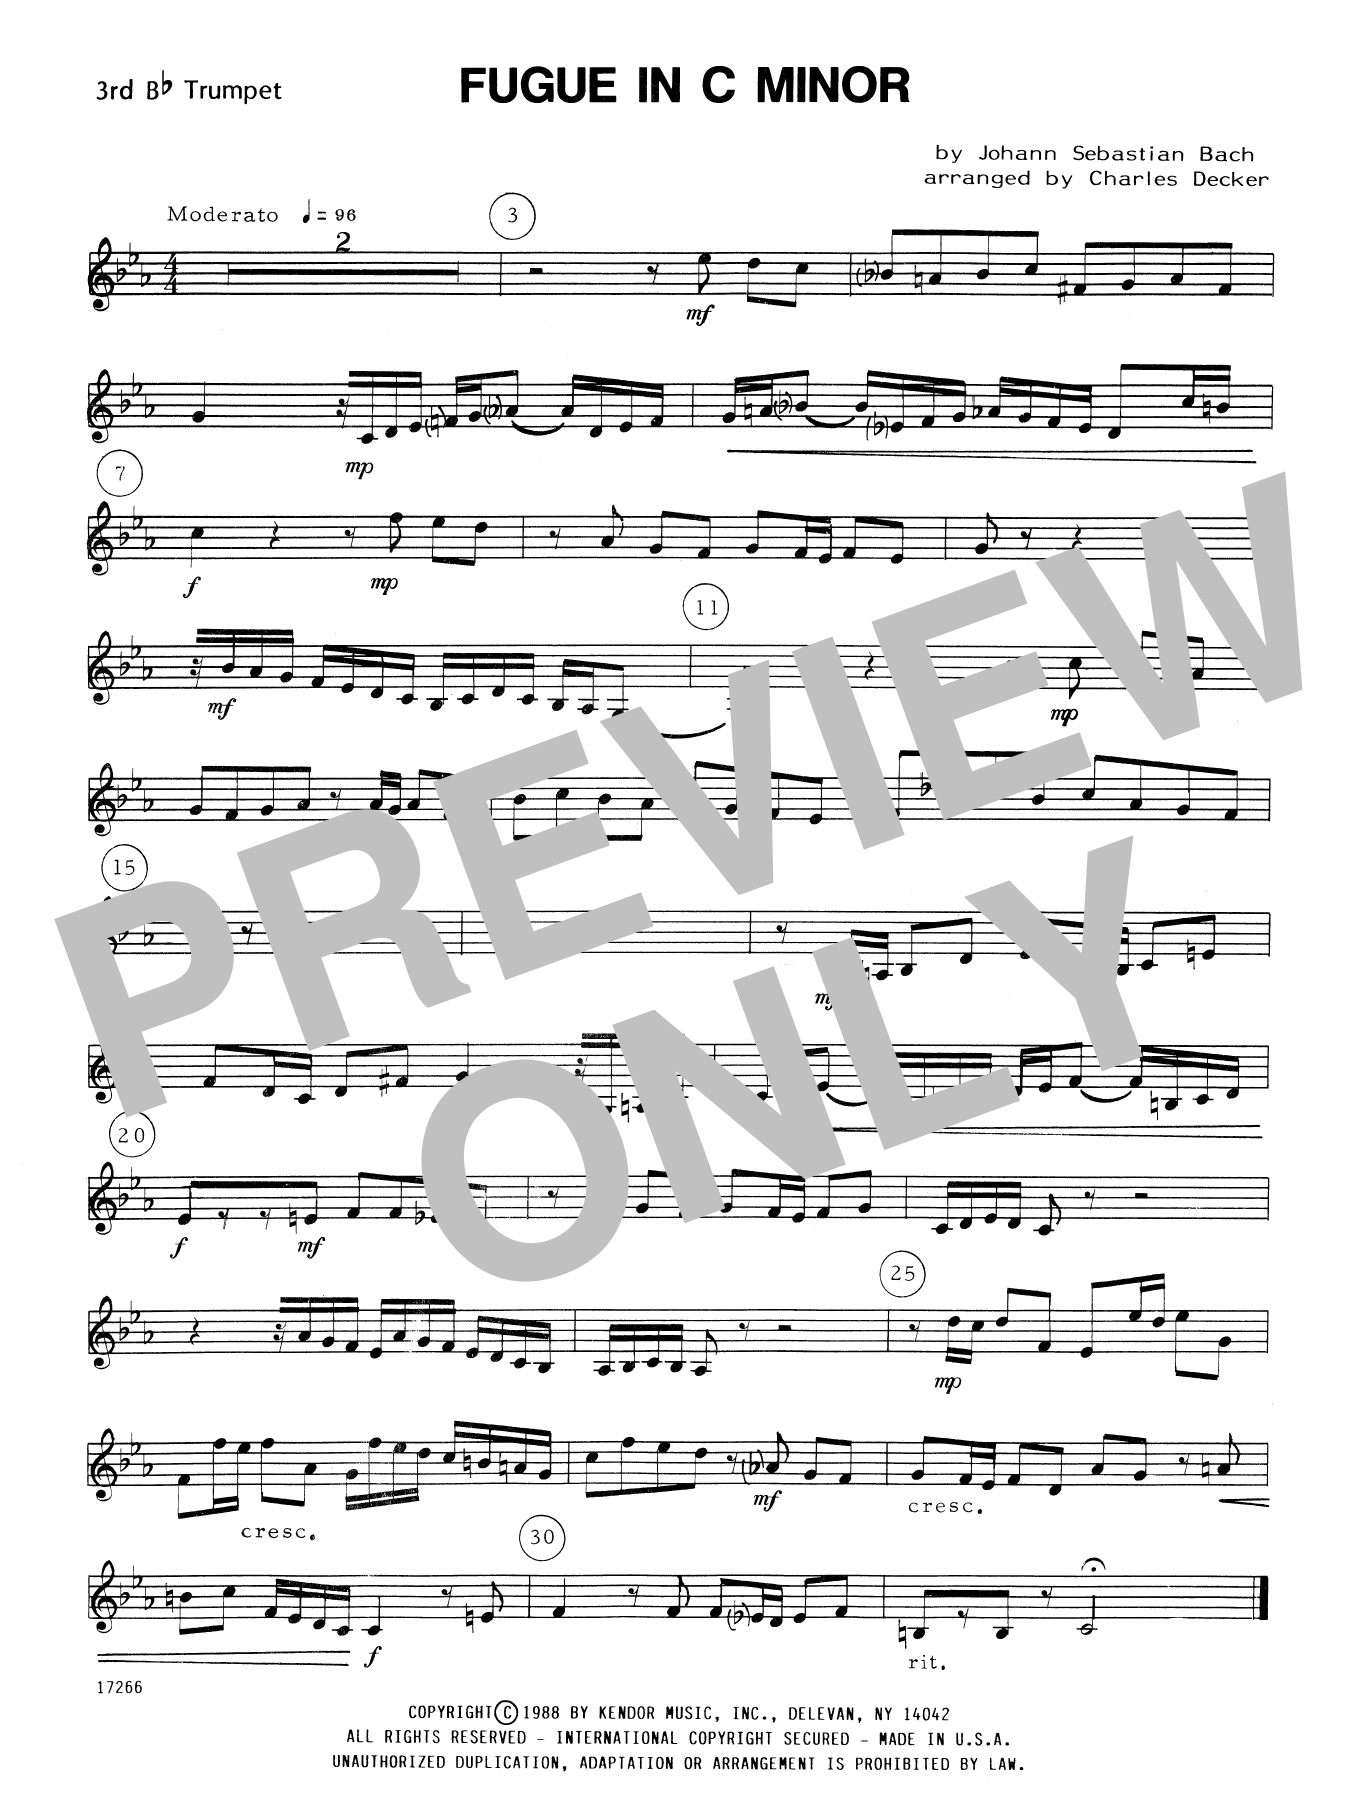 Charles Decker Fugue In C Minor - 3rd Bb Trumpet sheet music notes and chords. Download Printable PDF.